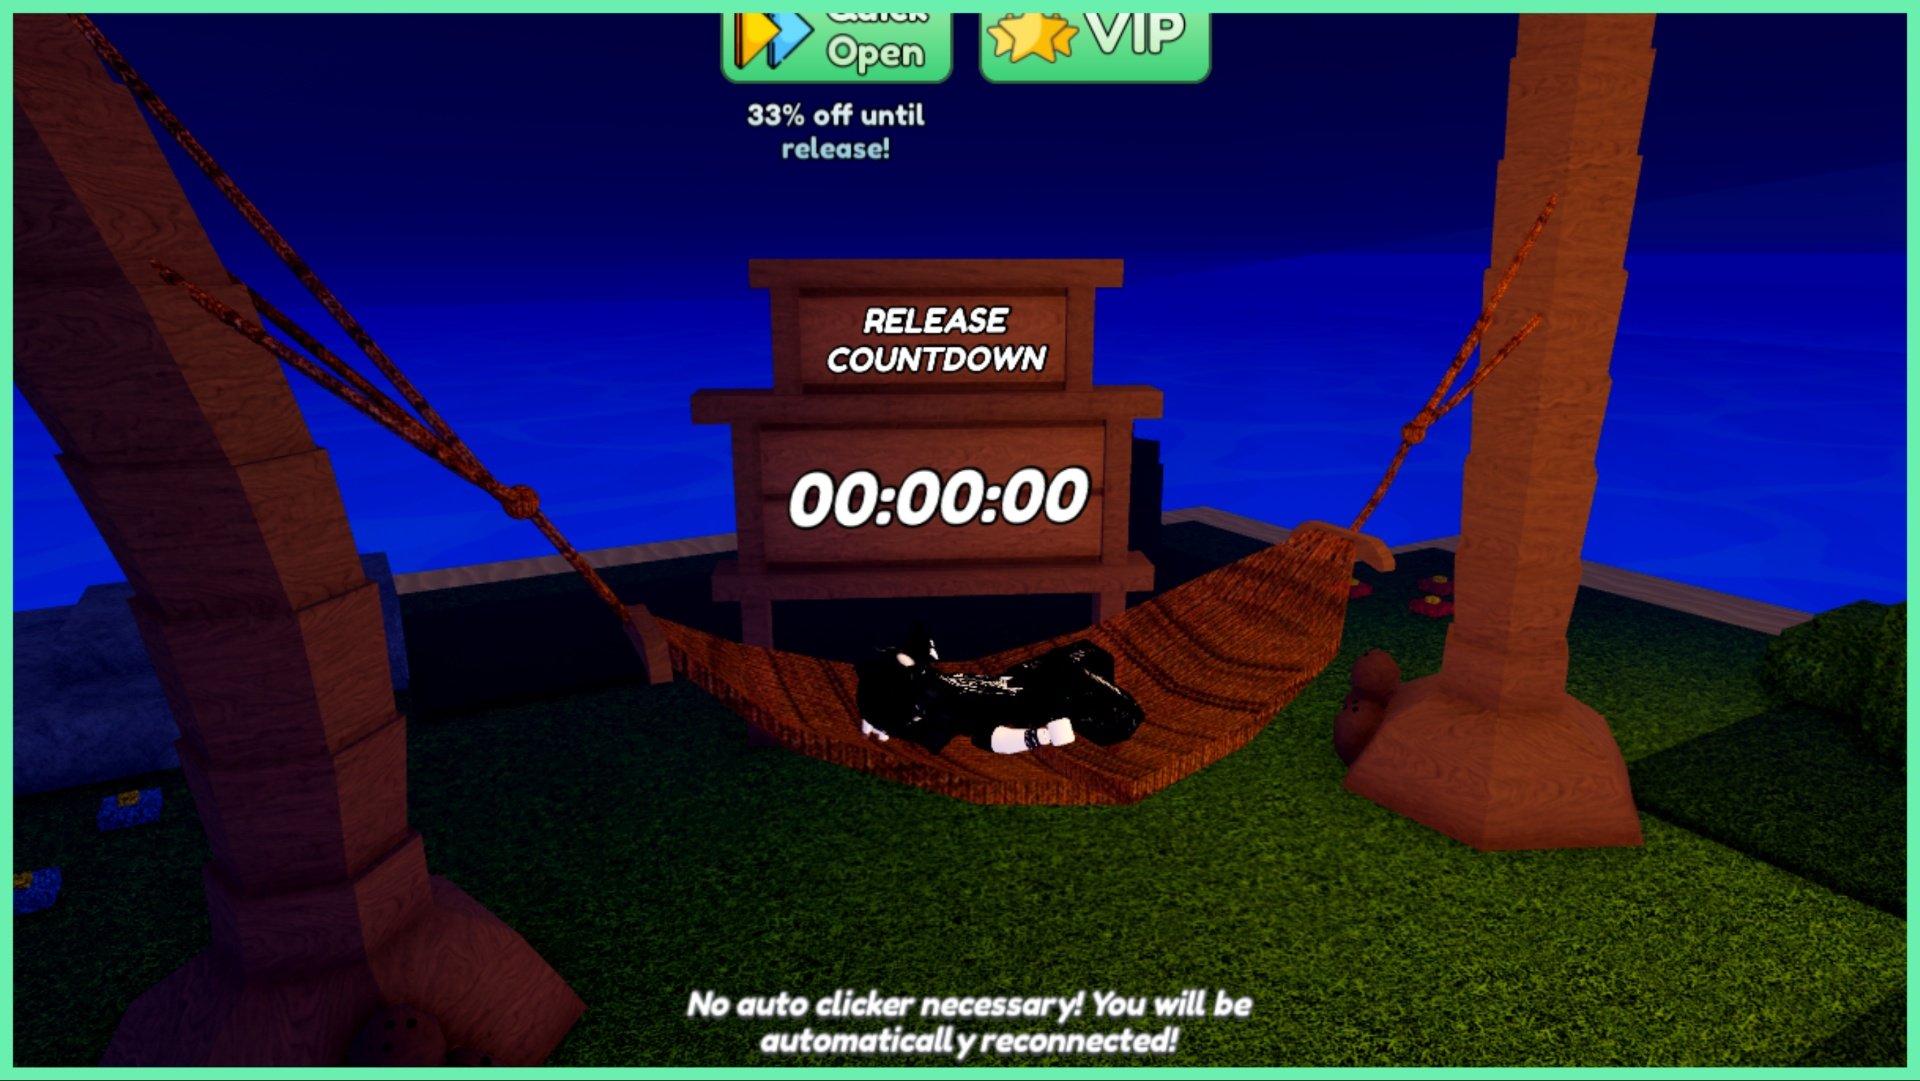 The image shows my avatar lay across a hammock at night time with a wooden board behind her counting down to the launch of the game.